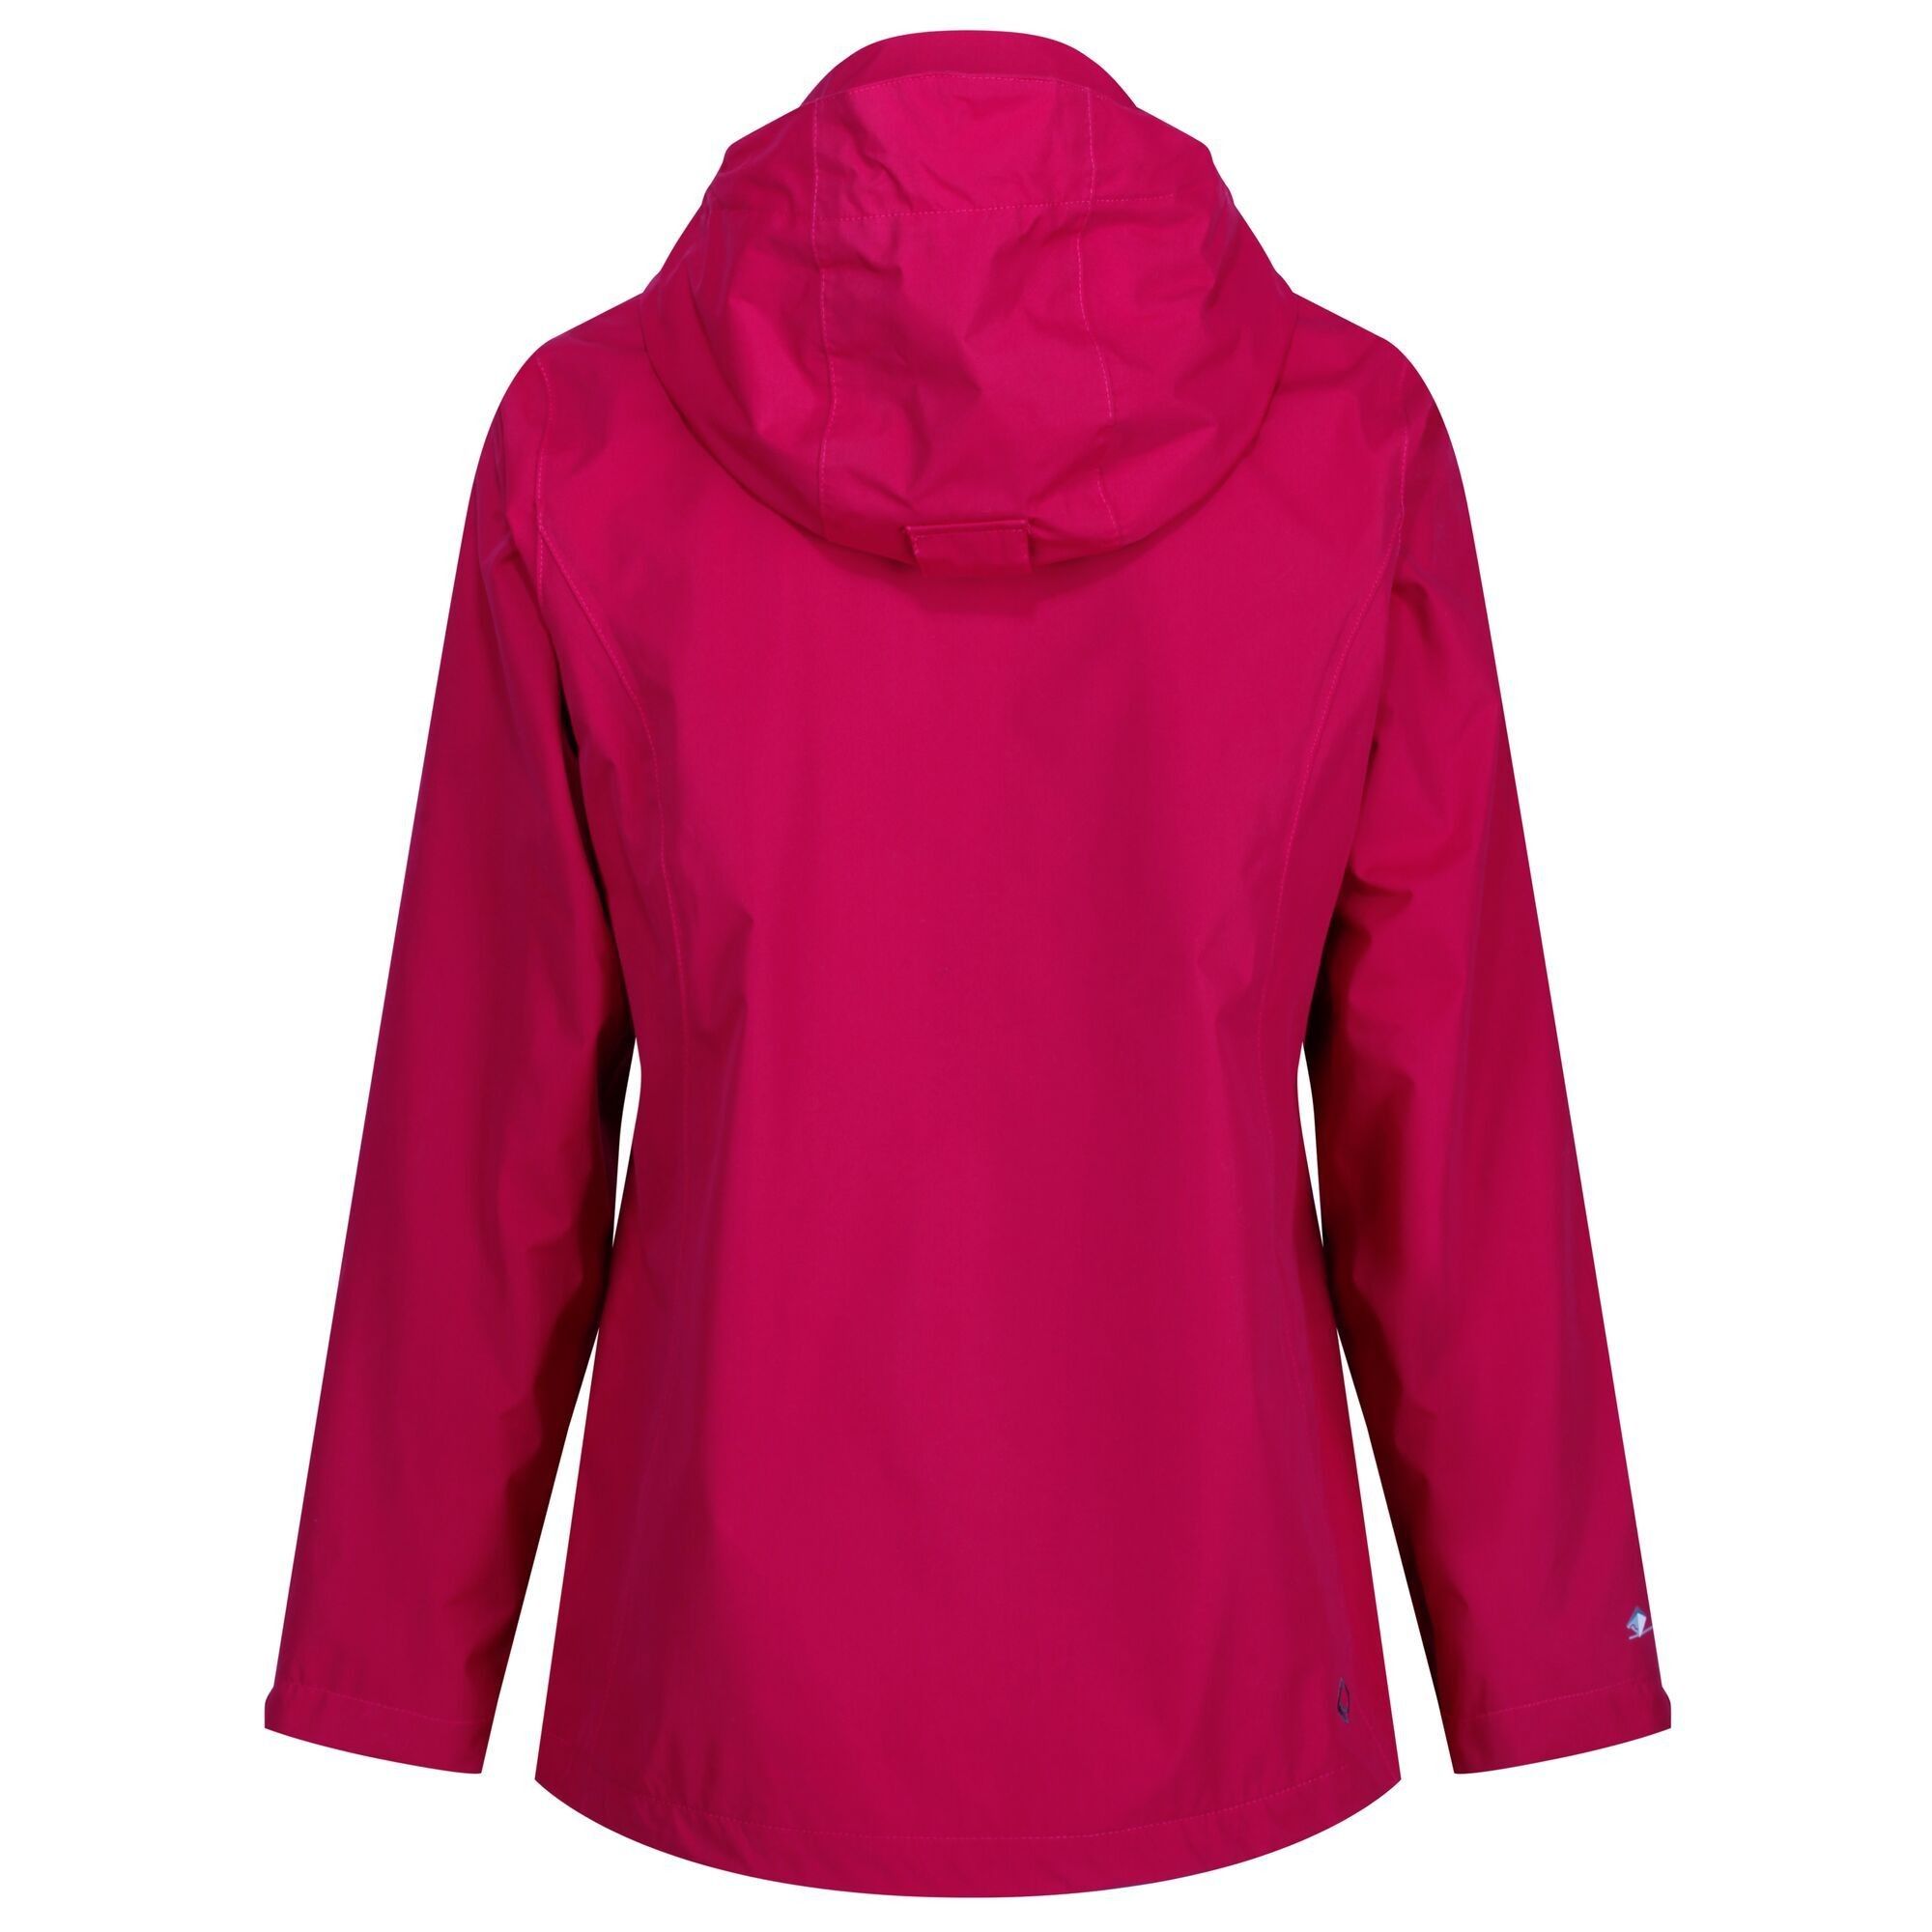 100% polyester. Womens waterproof shell jacket. Seam-sealed soft-touch polyester fabric with Hydrafort technology and a durable water repellent finish provides an effective barrier against wind and rain. Soft mesh lining is comfortable to wear and the adjustable hood neatly tucks away on dry days. Two zipped pockets come in handy for securing keys and phones. With the Regatta print on the chest. Regatta Womens sizing (bust approx): 6 (30in/76cm), 8 (32in/81cm), 10 (34in/86cm), 12 (36in/92cm), 14 (38in/97cm), 16 (40in/102cm), 18 (43in/109cm), 20 (45in/114cm), 22 (48in/122cm), 24 (50in/127cm), 26 (52in/132cm), 28 (54in/137cm), 30 (56in/142cm), 32 (58in/147cm), 34 (60in/152cm), 36 (62in/158cm).